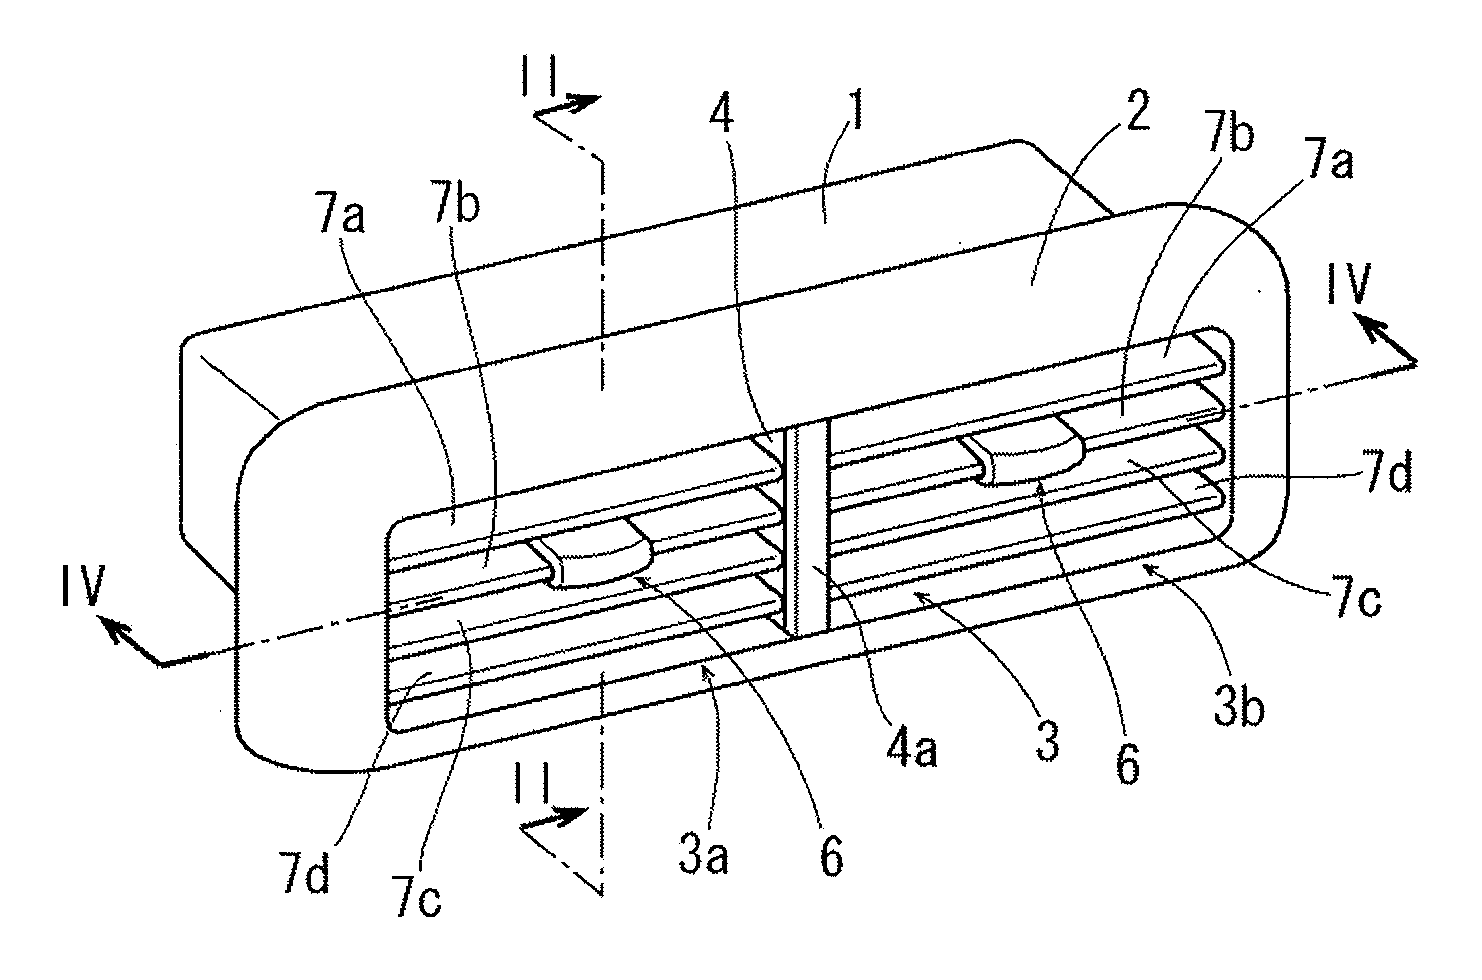 Supporting structure for adjustable air guide vanes